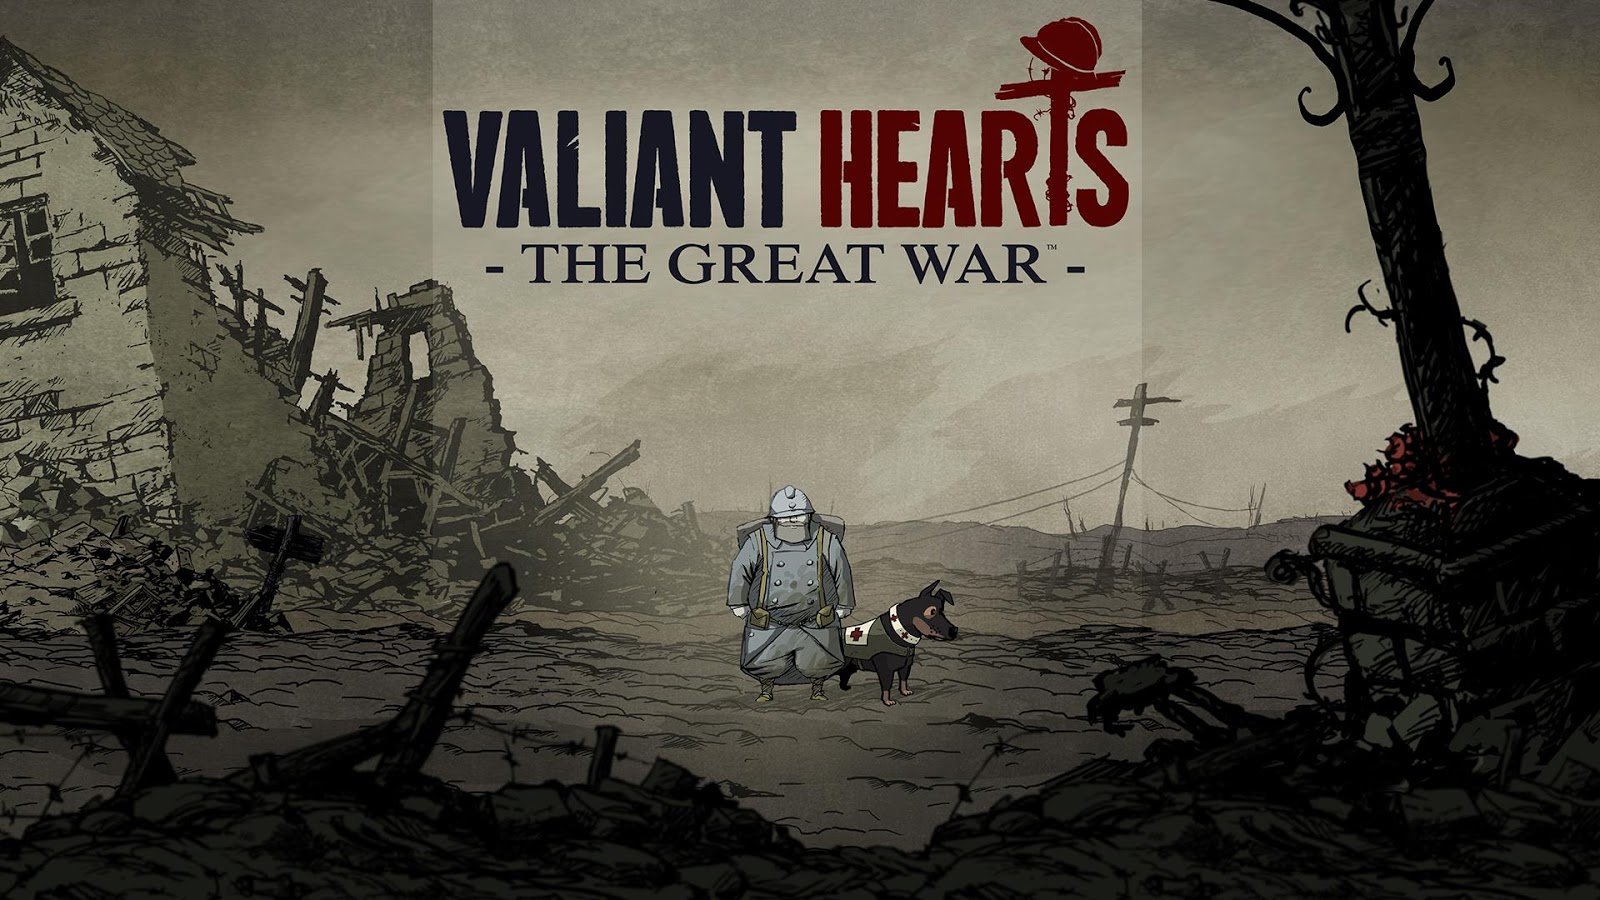 Valiant Hearts: The Great War Backgrounds, Compatible - PC, Mobile, Gadgets| 1600x900 px